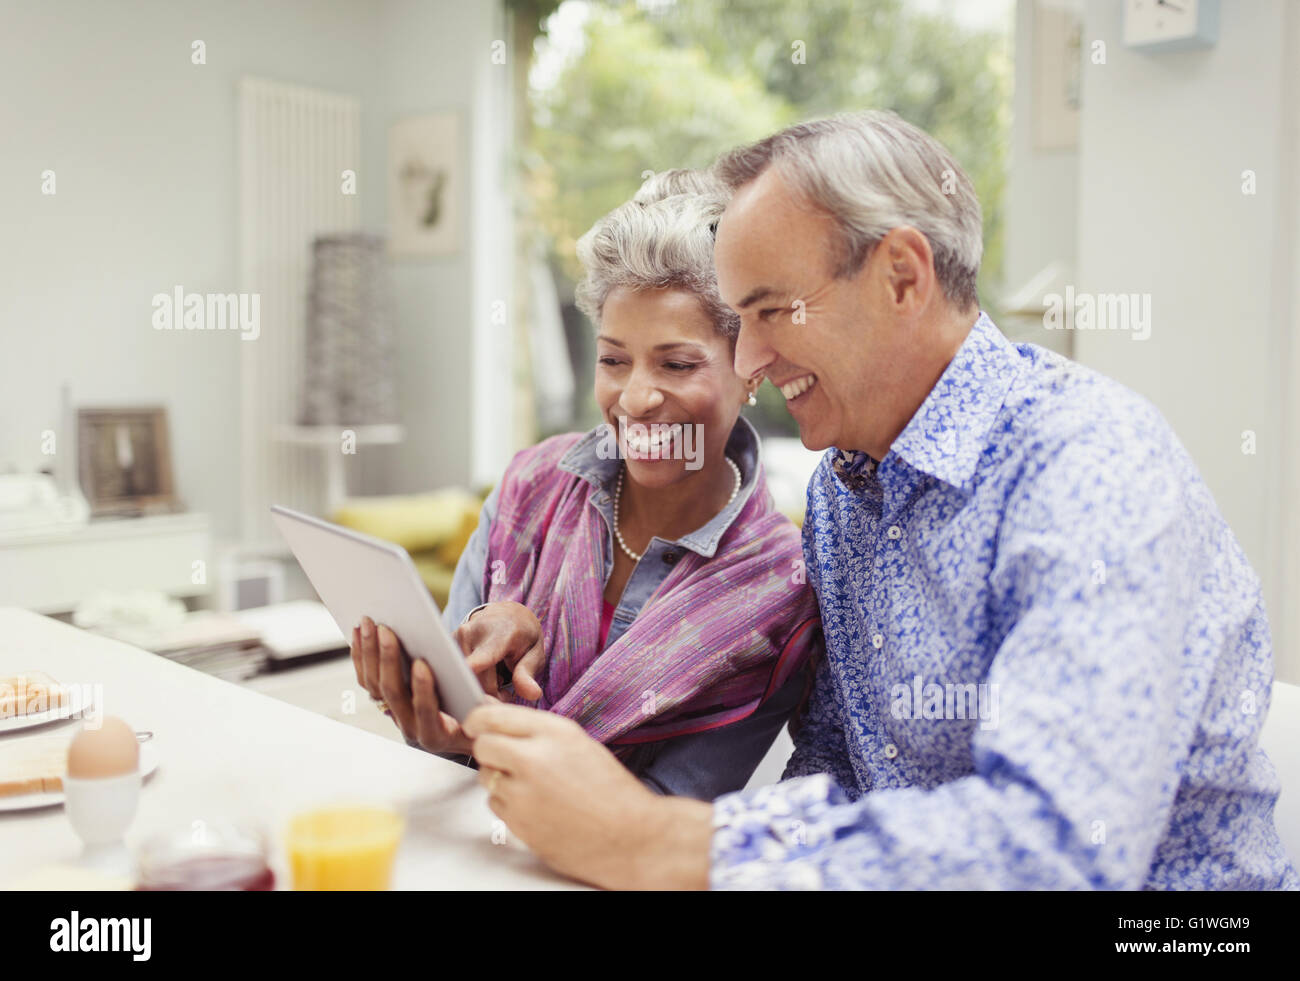 Smiling mature couple sharing digital tablet at breakfast table Banque D'Images